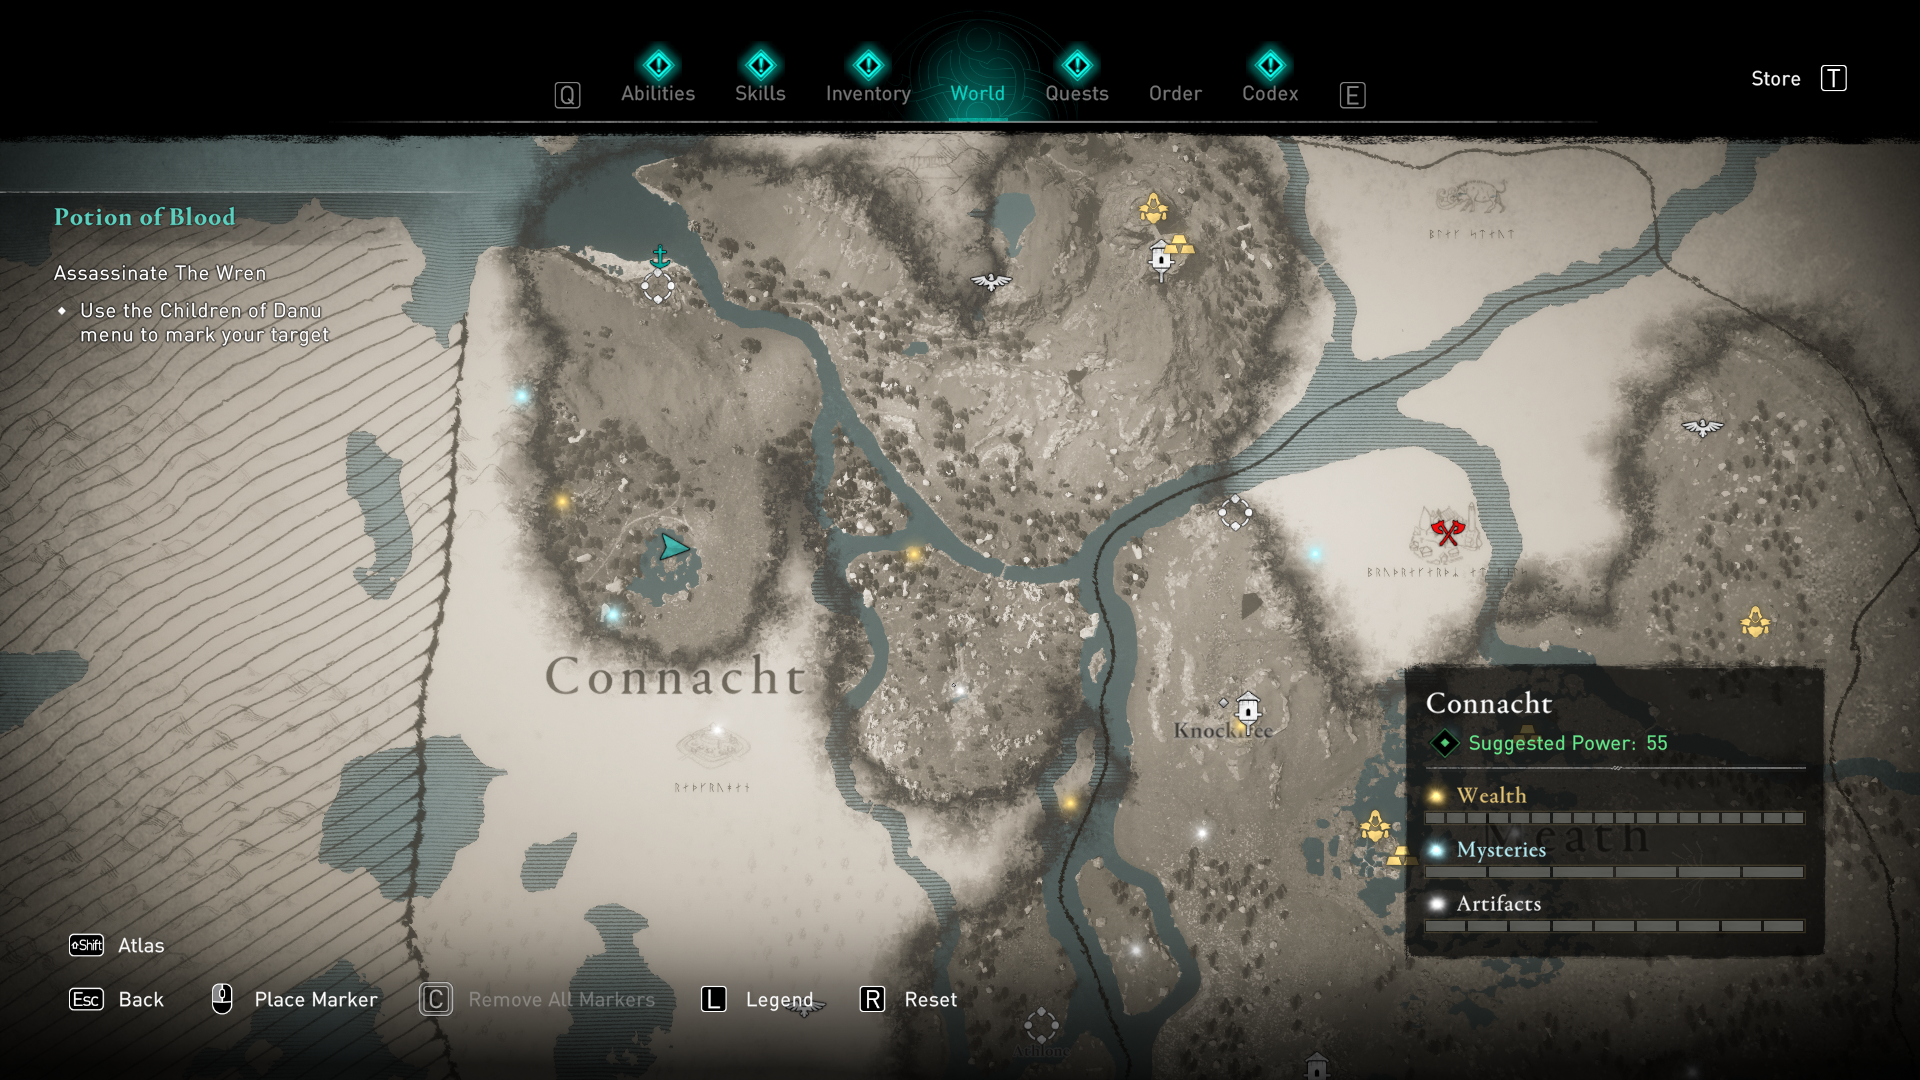 Assassin's Creed Valhalla Wrath Of The Druids Walkthrough: How To Complete Potion Of Blood